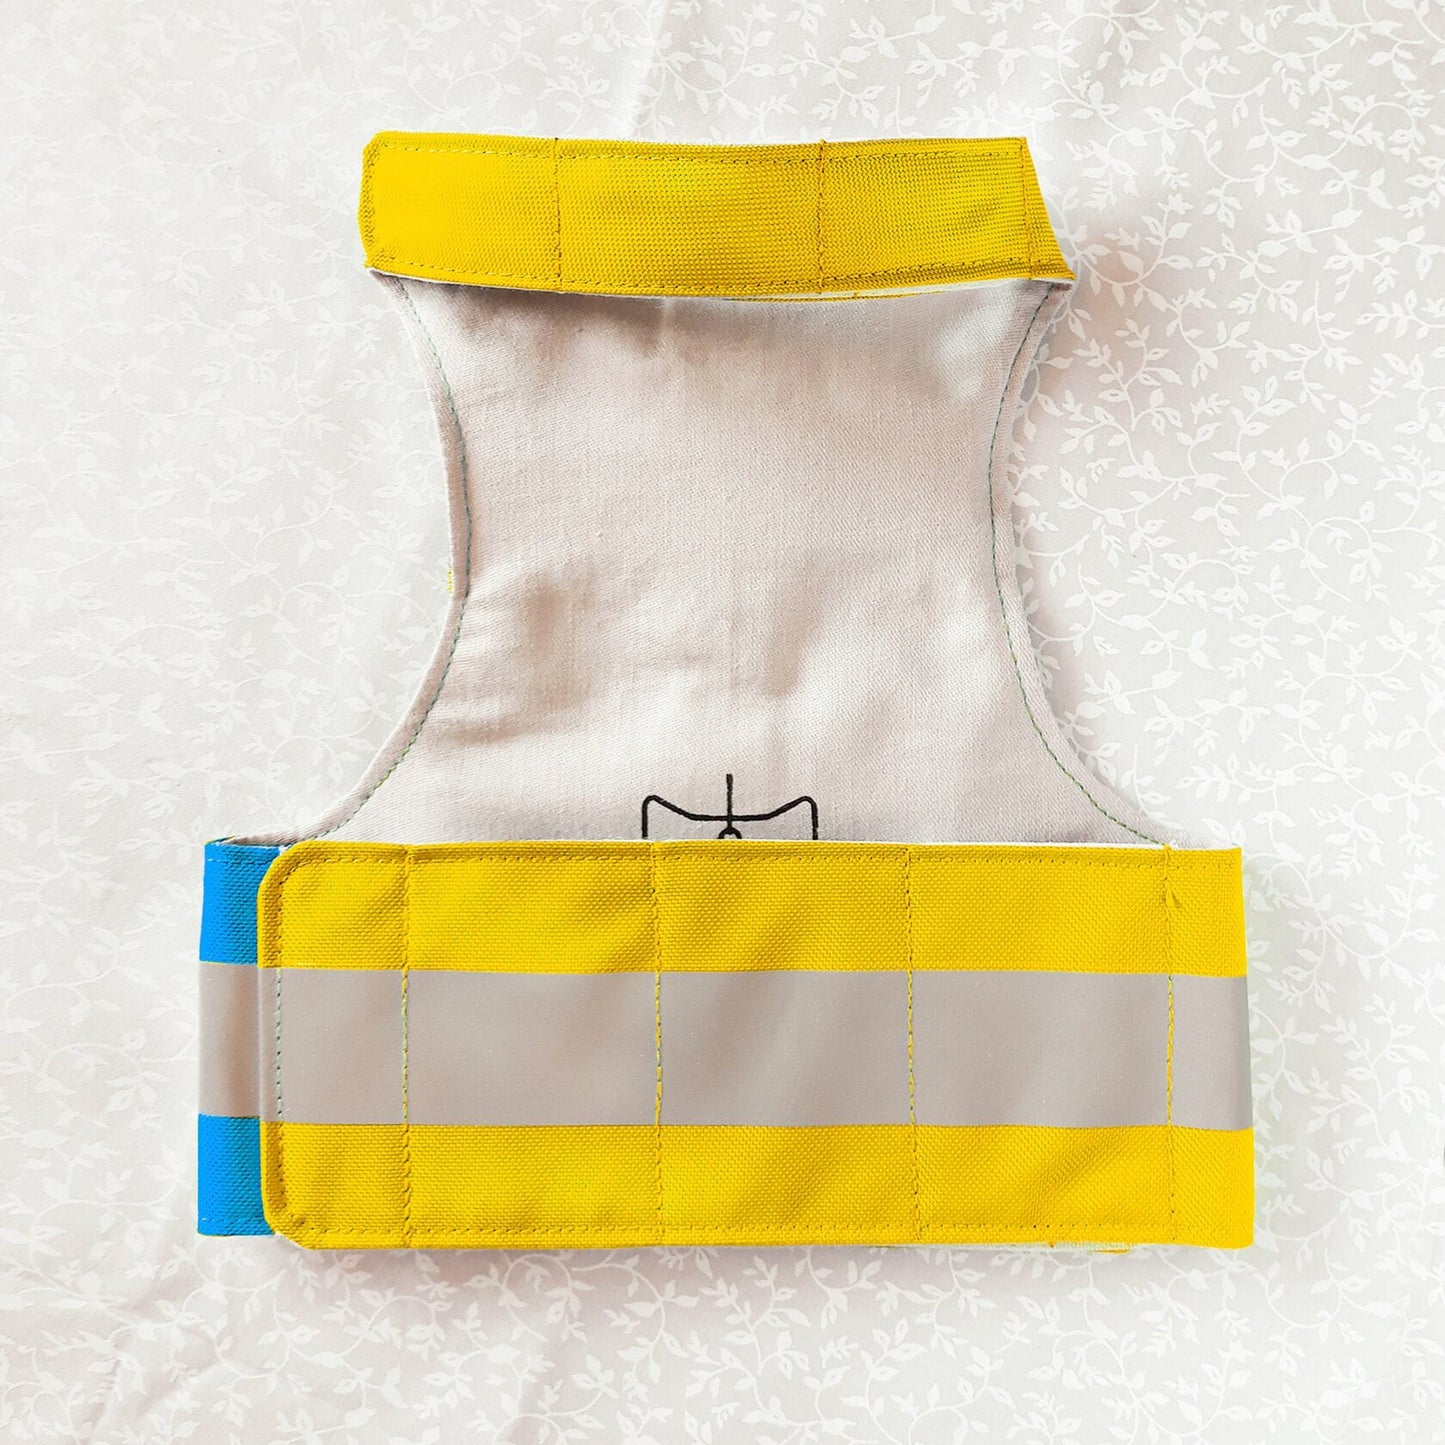 UKRAINE. Escape proof water-repellent safety cat harness with reflective stripes